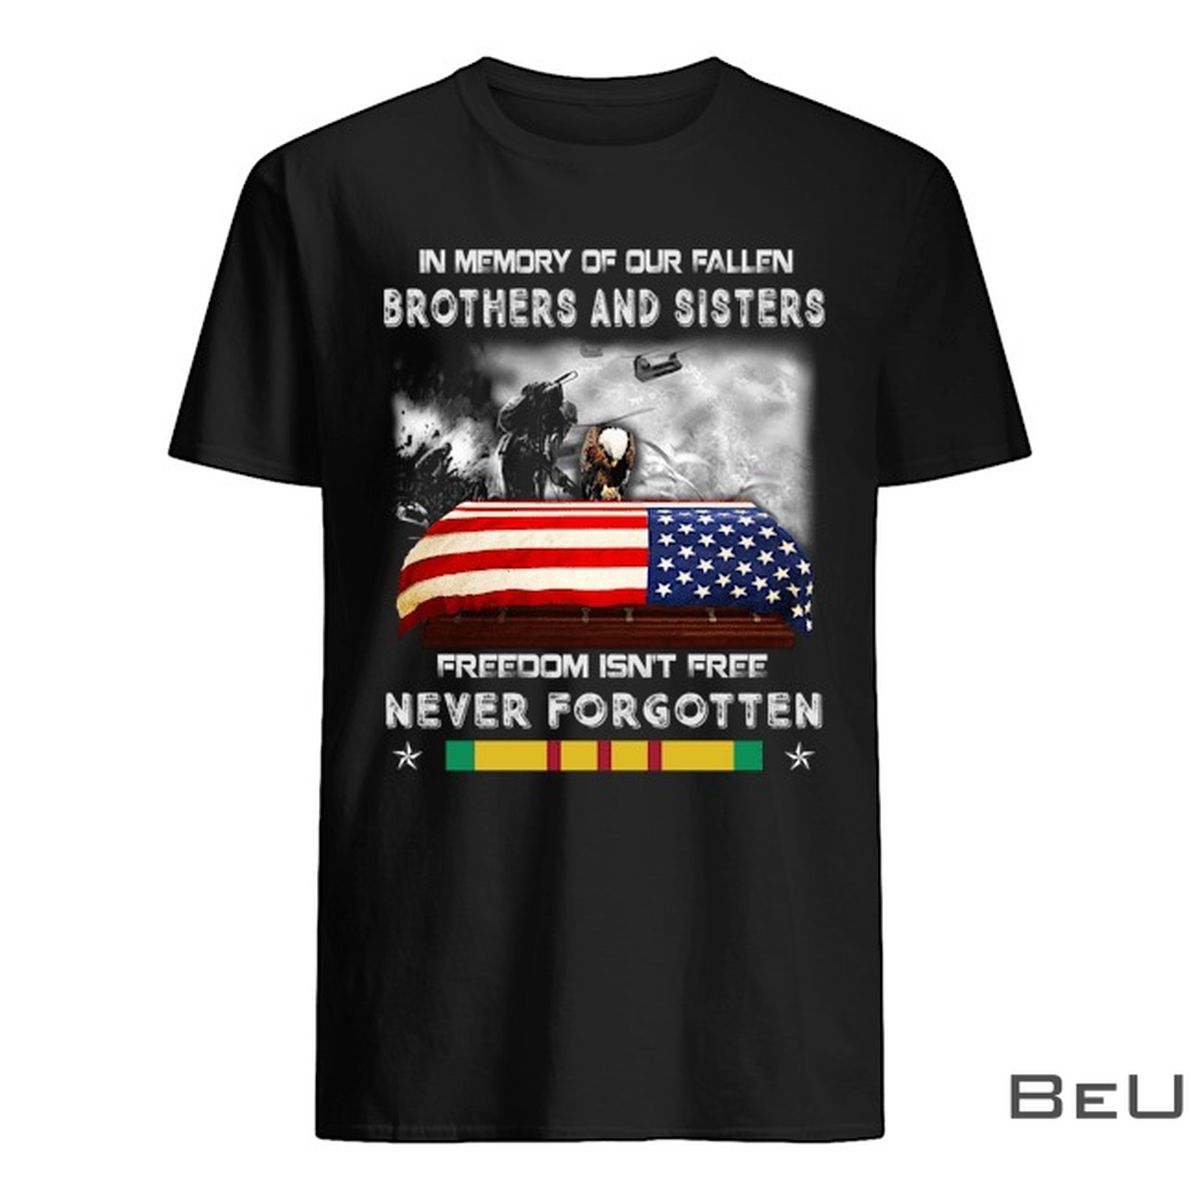 In-Memory-Of-Our-Fallen-Brothers-And-Sisters-Freedom-Isnt-Free-Never-Forgotten-Shirt